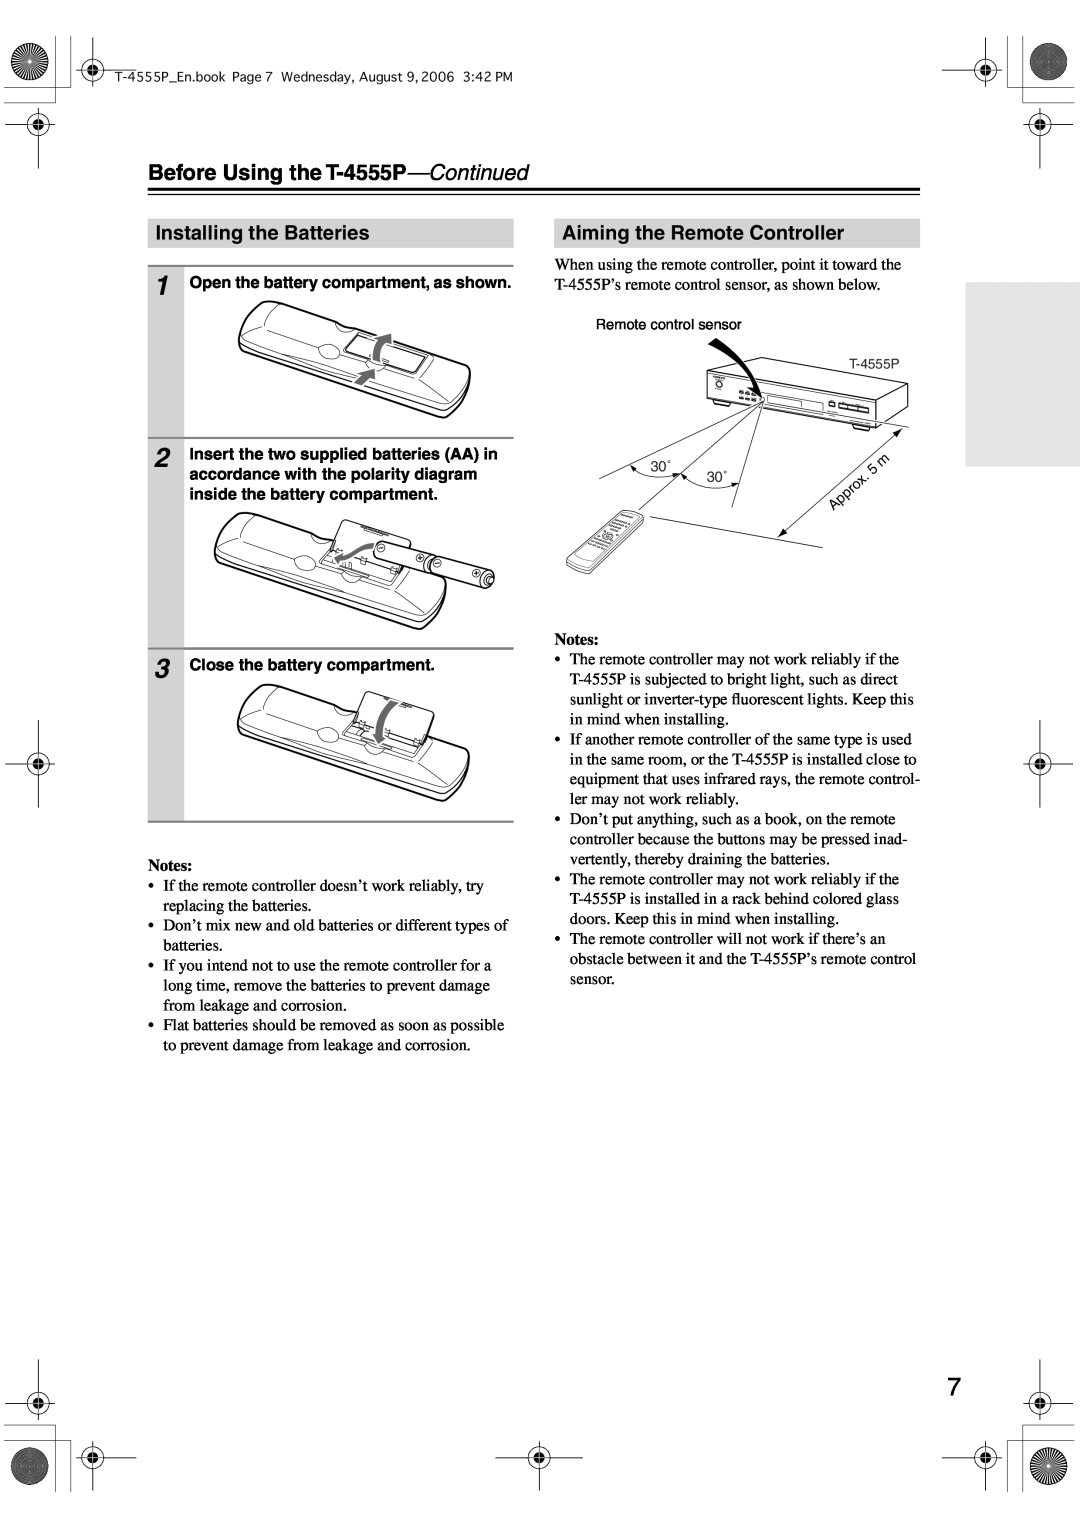 Onkyo instruction manual Before Using the T-4555P-Continued, Installing the Batteries, Aiming the Remote Controller 